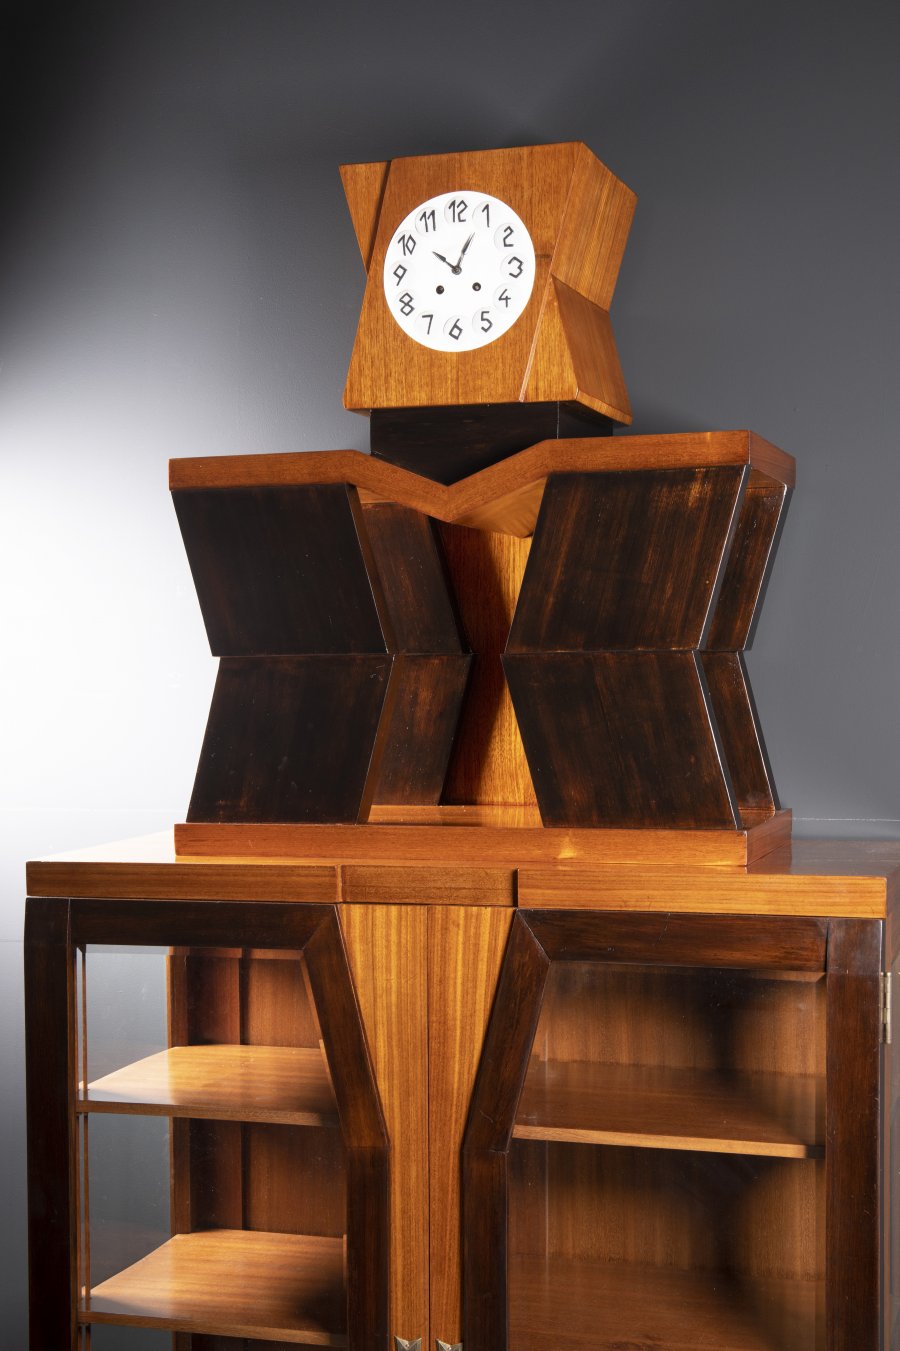 CUBIST GLASS CABINET WITH CLOCK